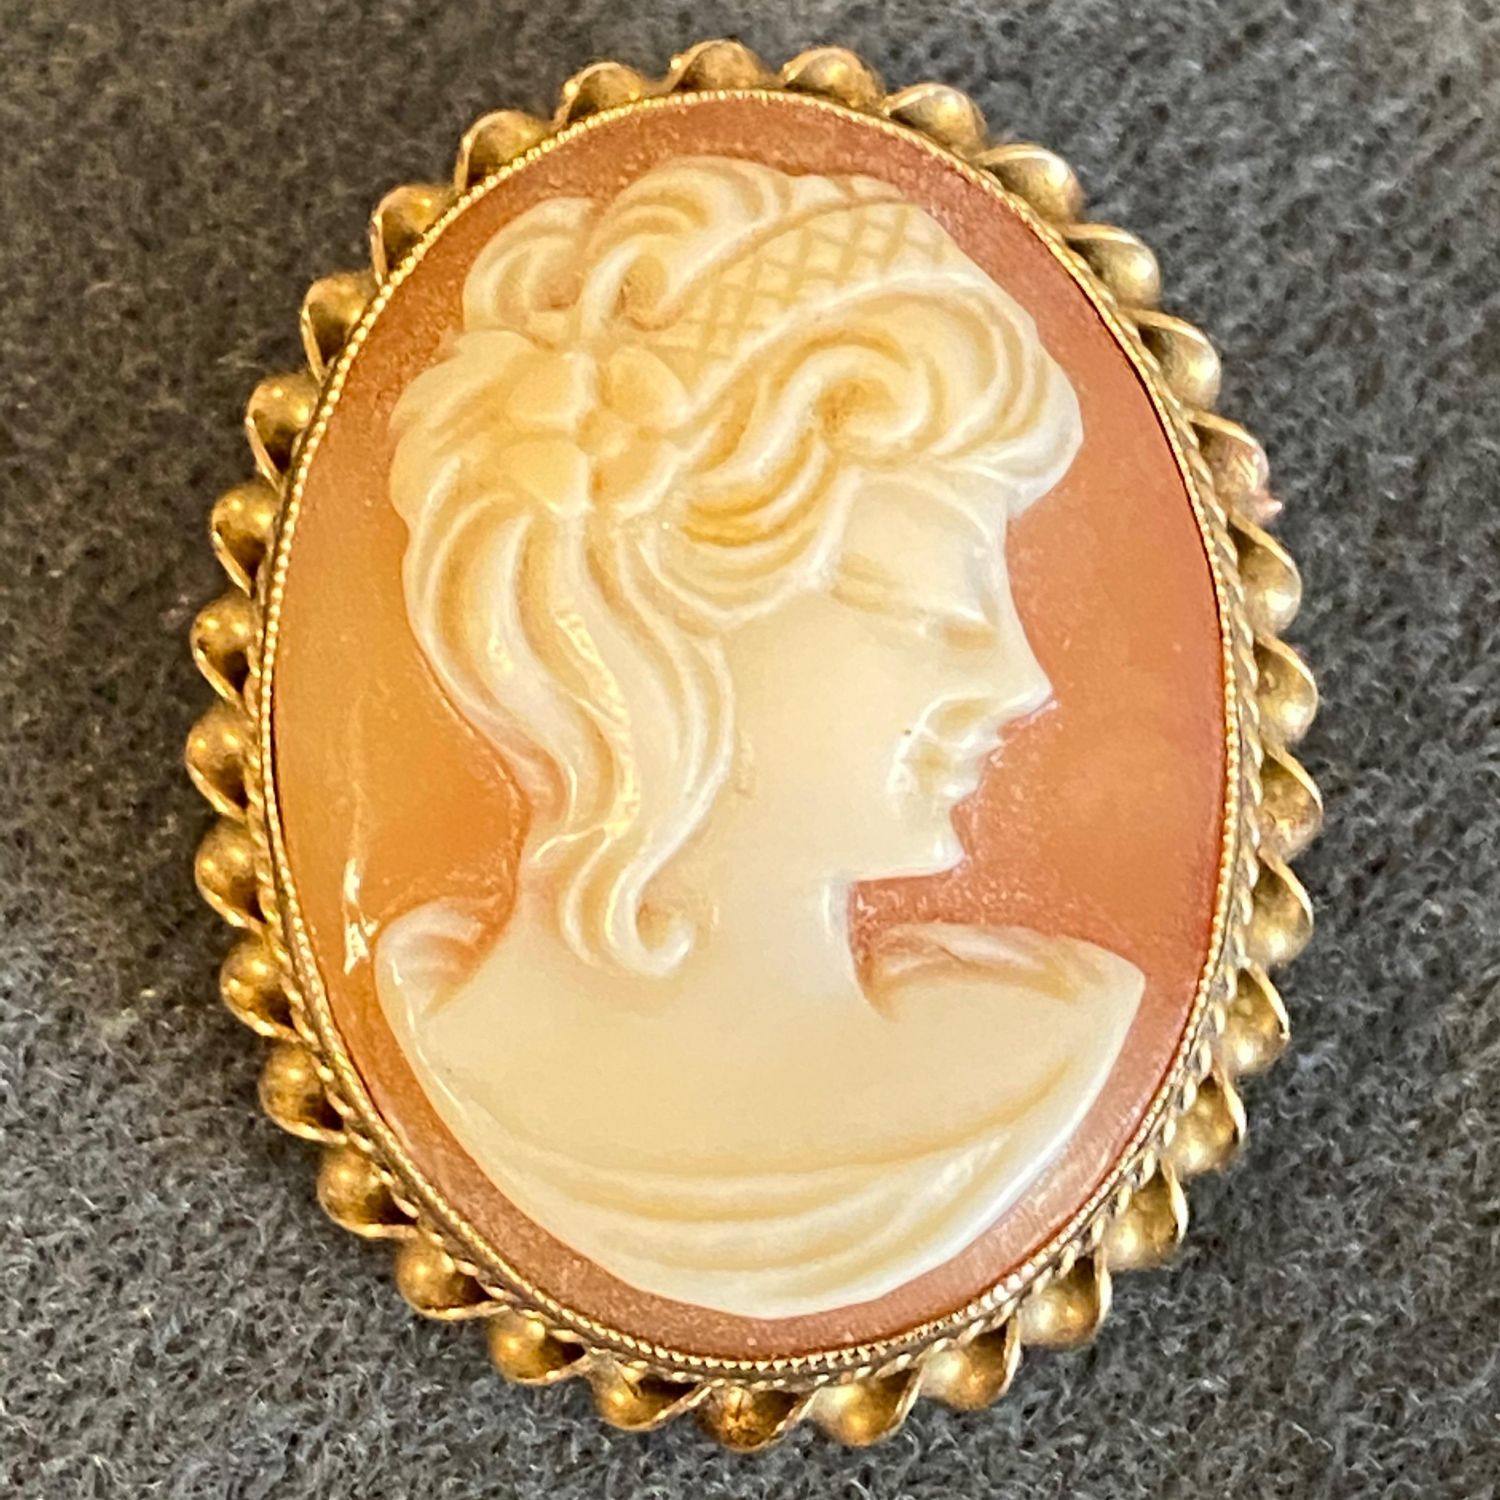 9ct Gold Cameo Brooch - Jewellery & Gold - Hemswell Antique Centres